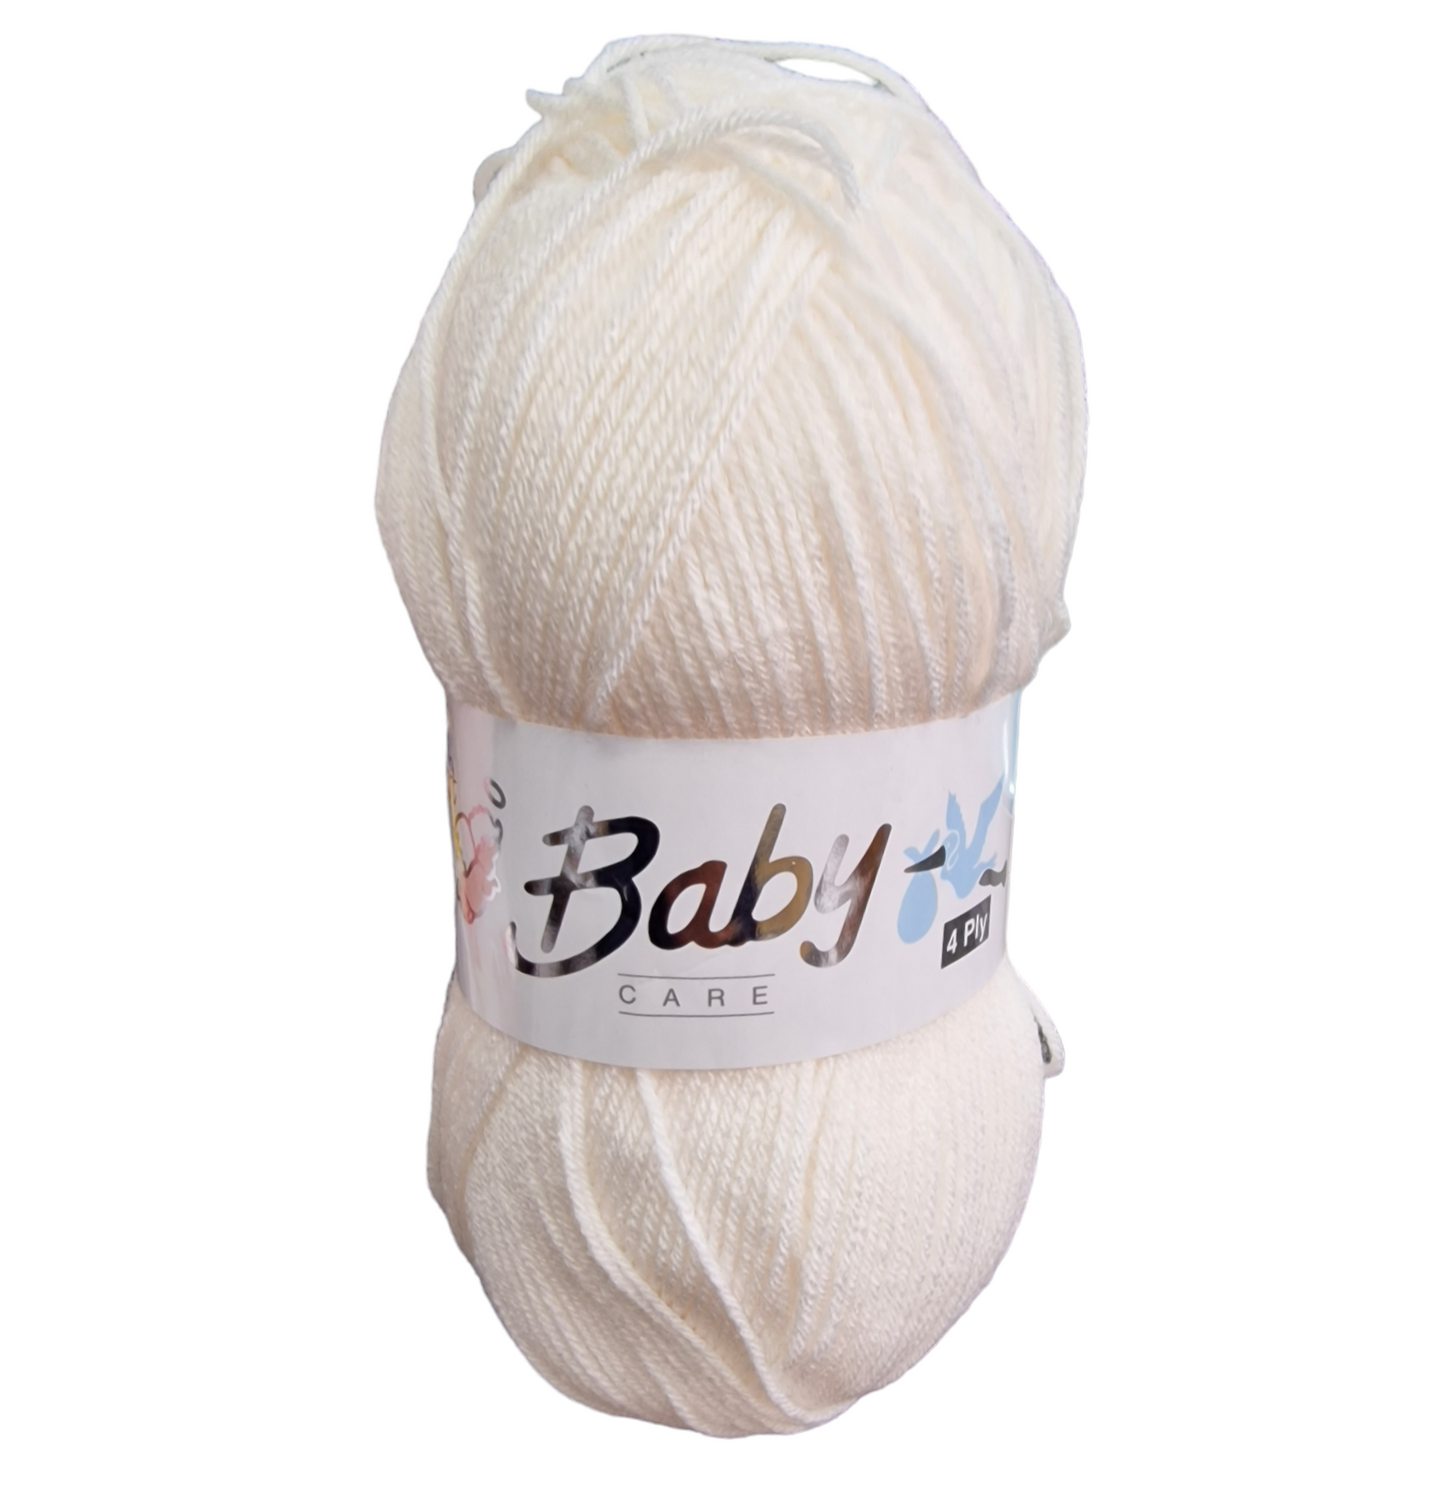 Baby Care 4 ply